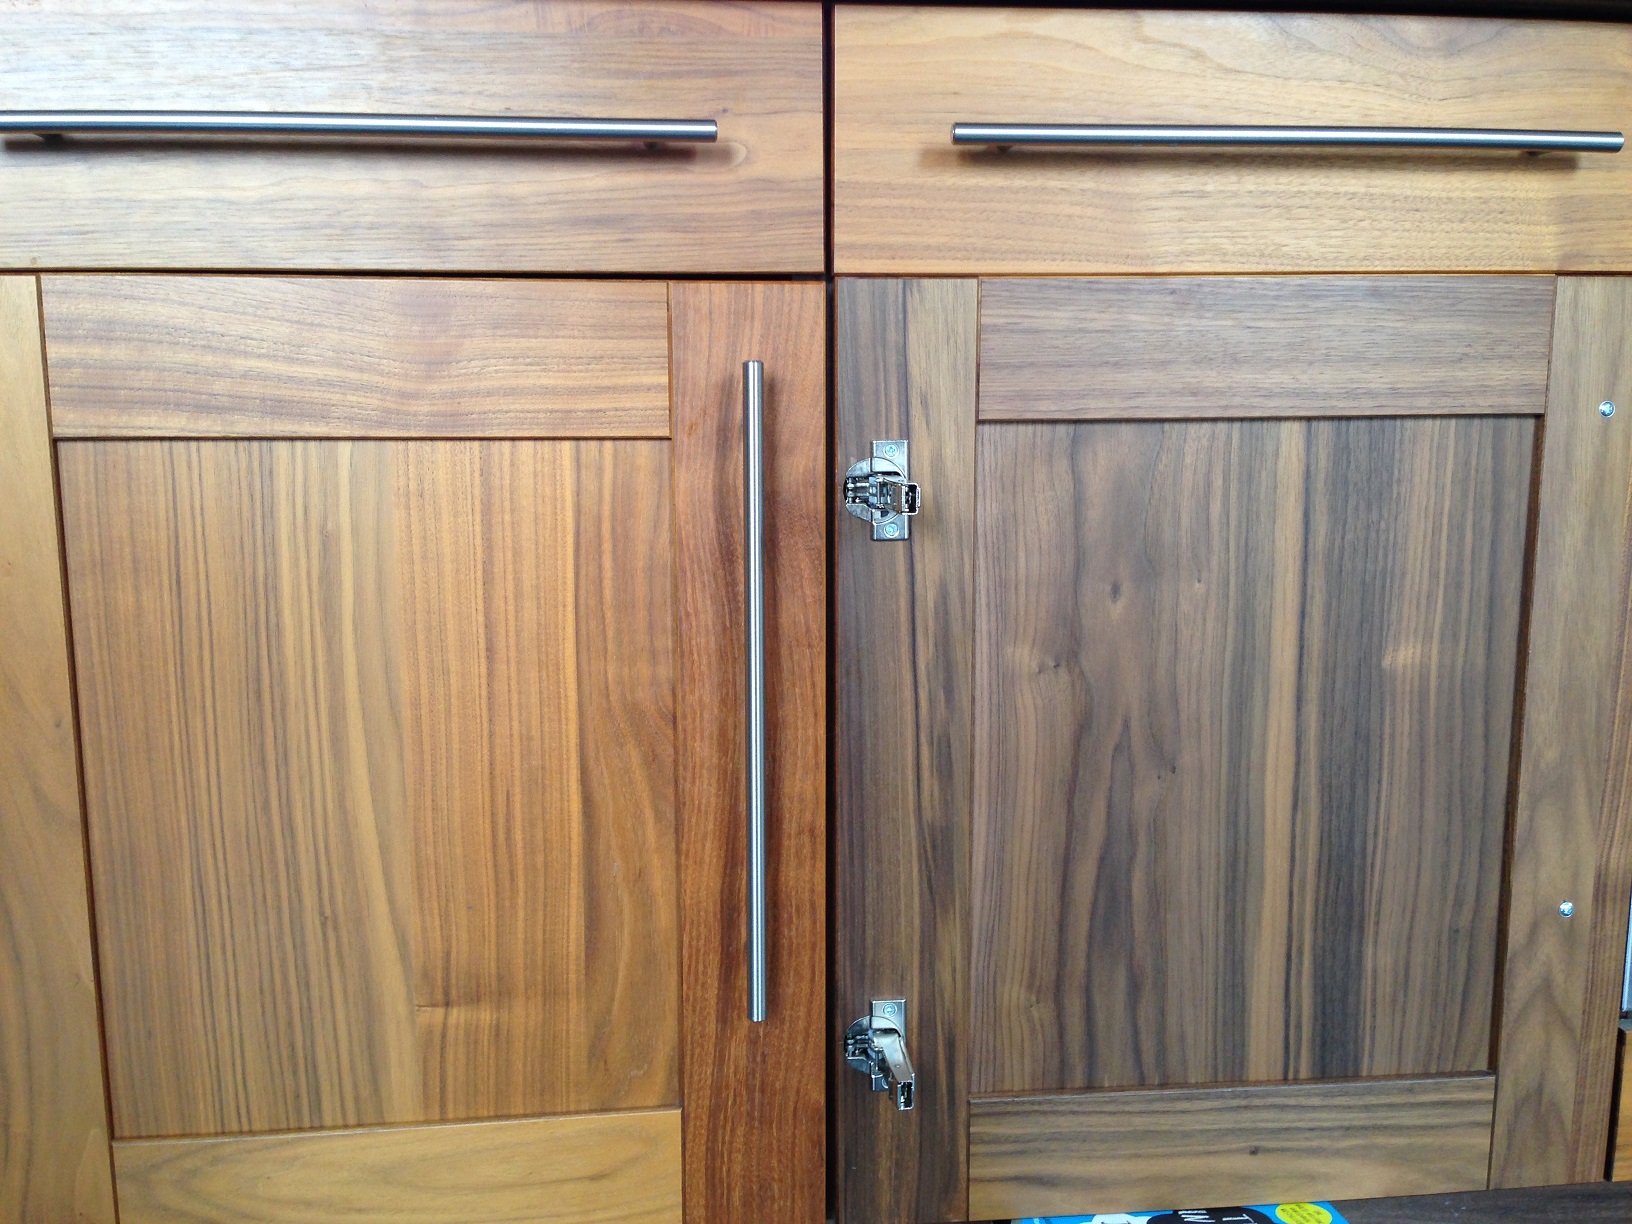 Walnut kitchen doors fading and turning orange - Page 1 - Homes, Gardens and DIY - PistonHeads